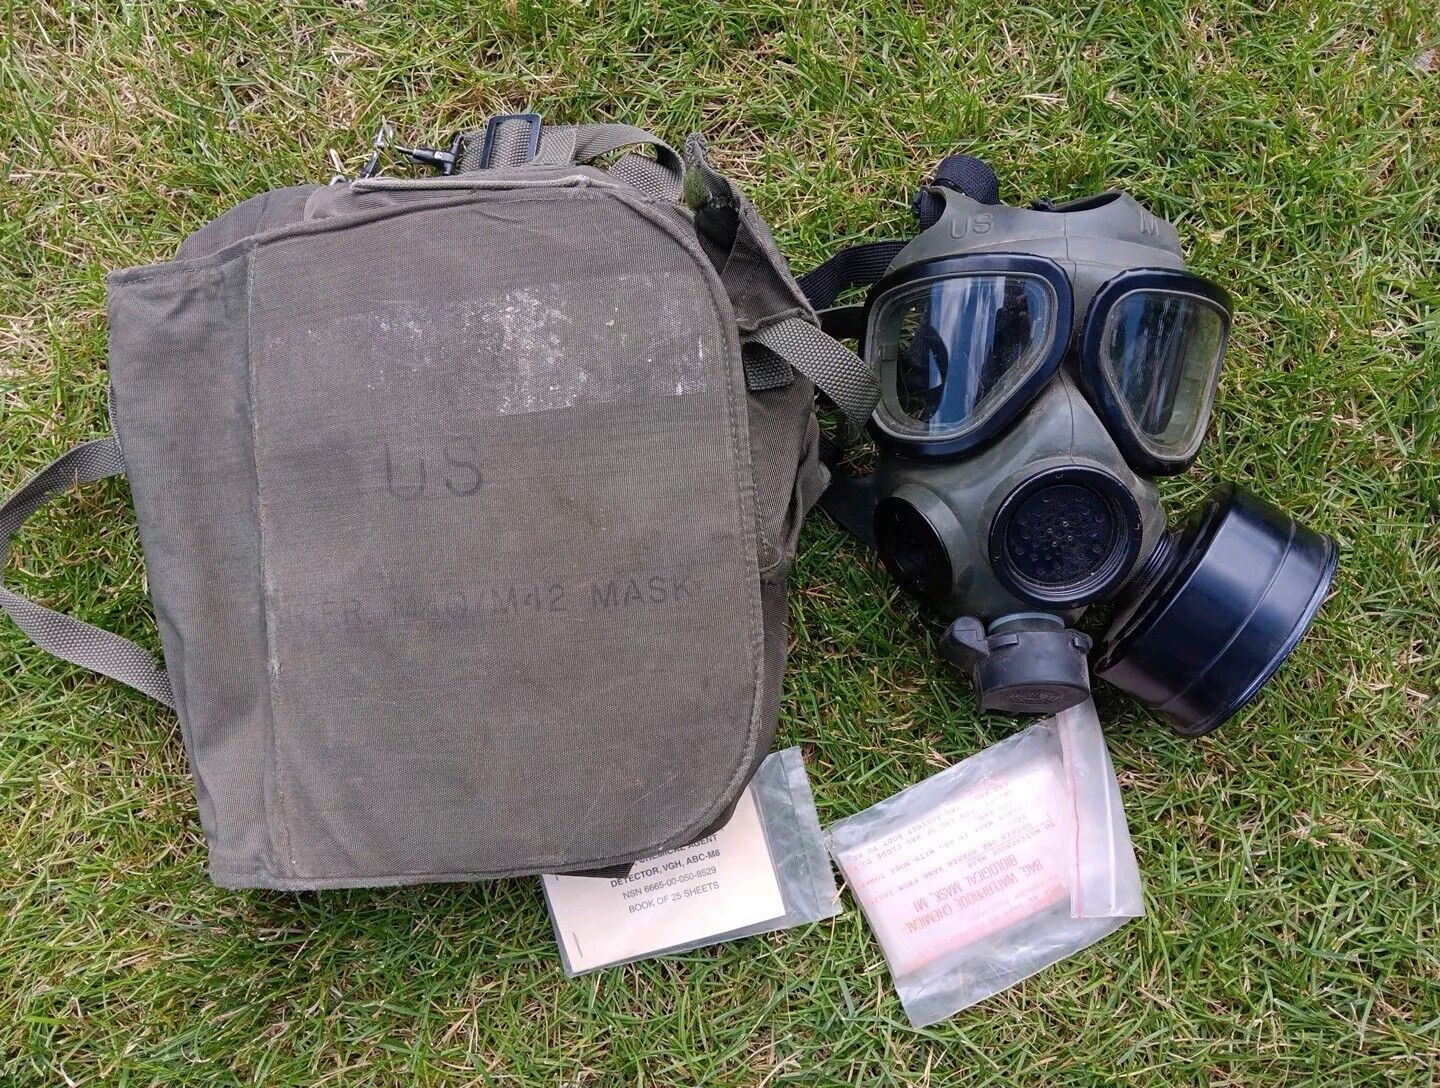  US Army Chemical Biological Field Gas Mask With Bag Sz Med